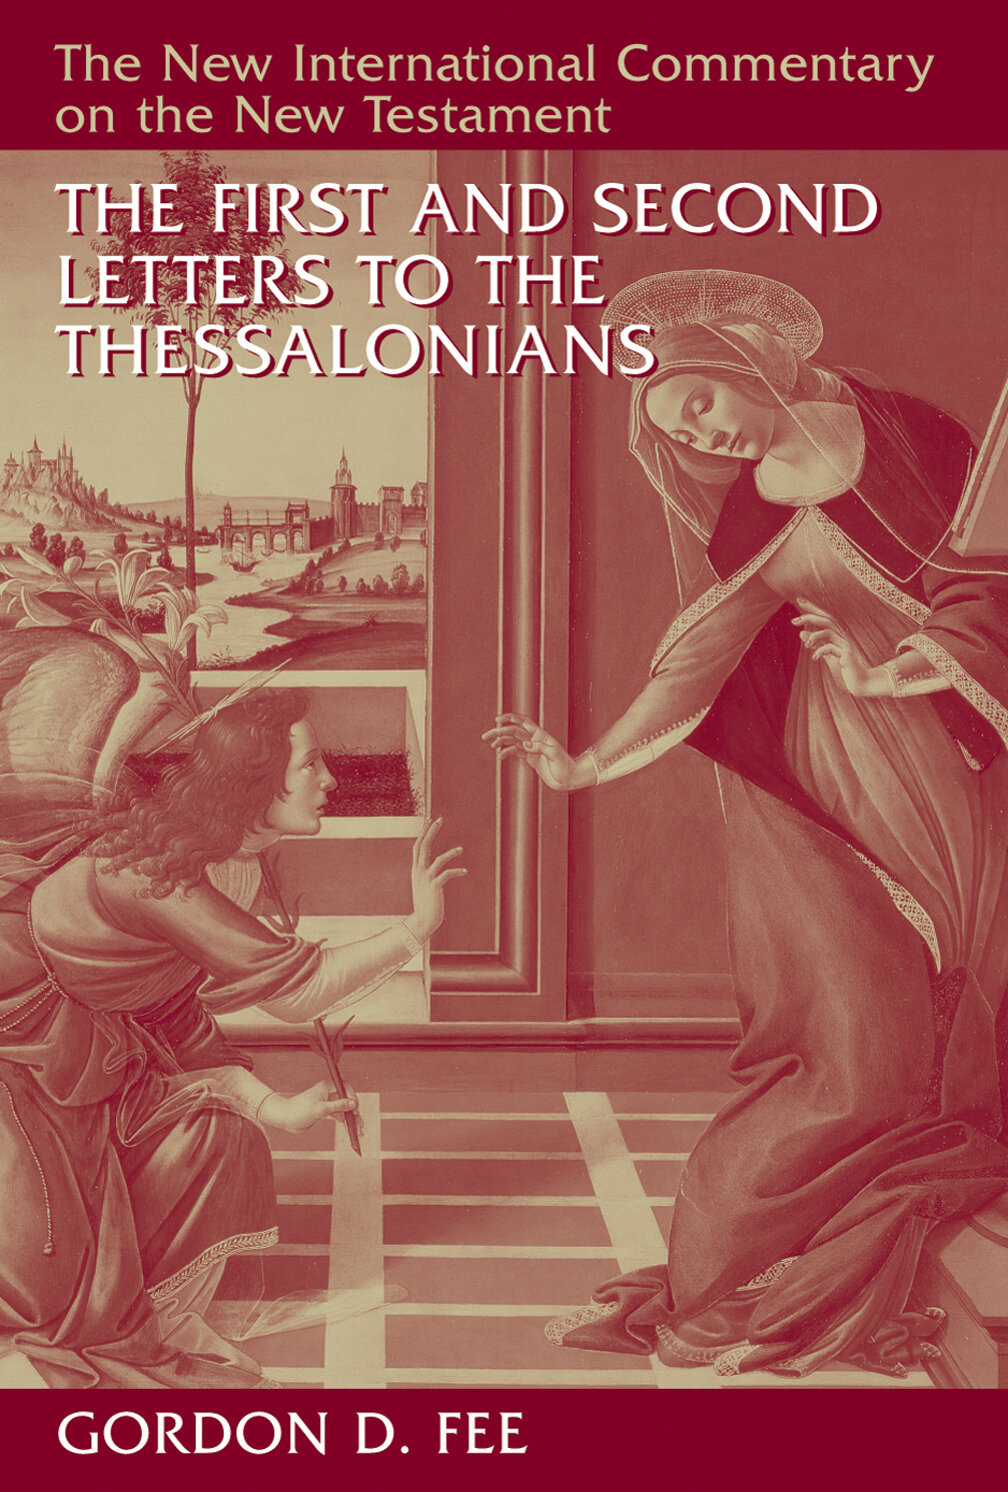 The First and Second Letters to the Thessalonians (The New International Commentary on the New Testament | NICNT)